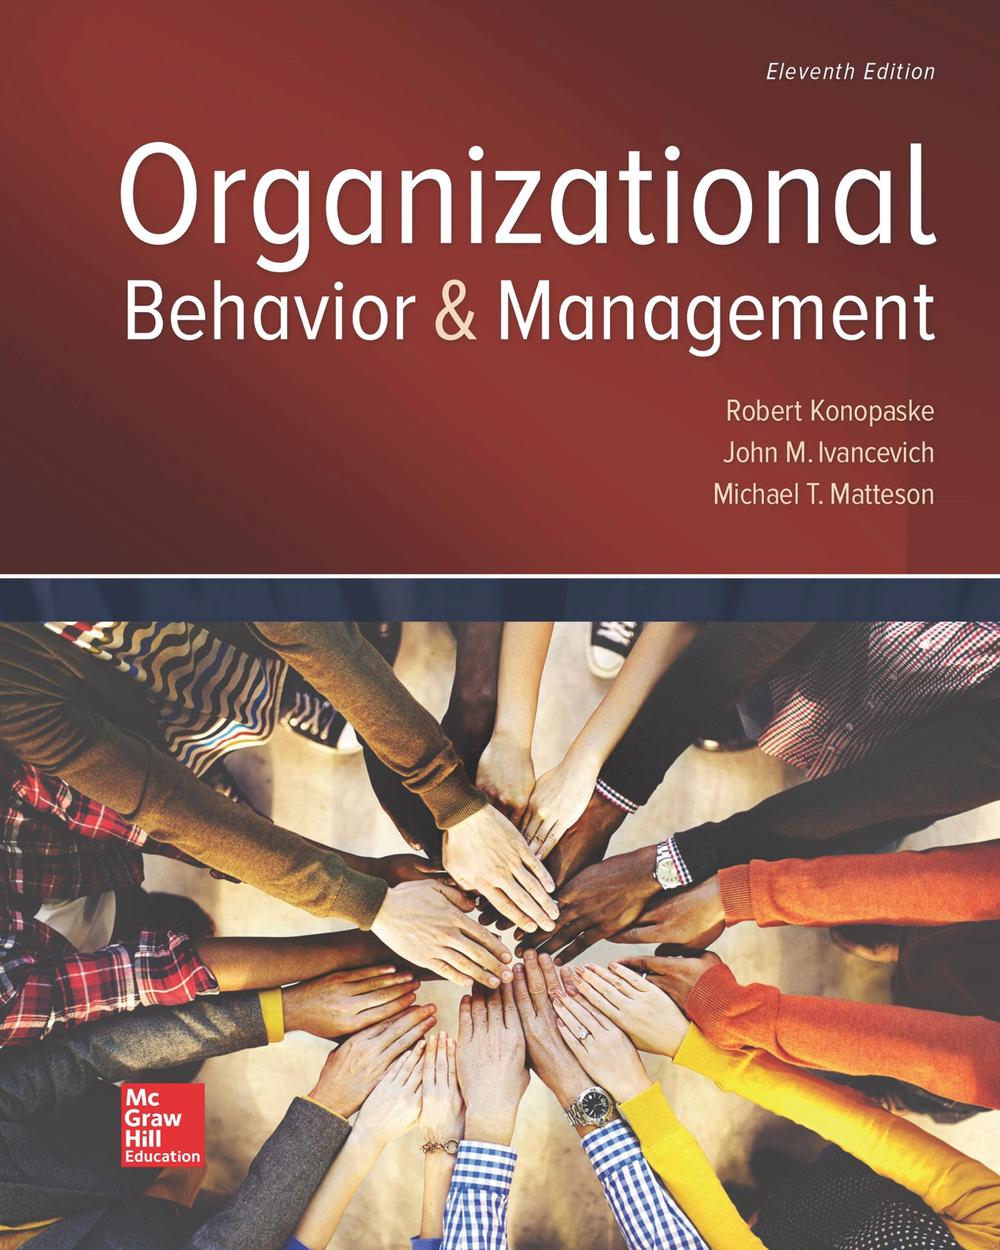 9781259894534　The　11th　Edition　at　Buy　online　Paperback,　and　Robert　Konopaske,　by　Management,　Behavior　Organizational　Nile